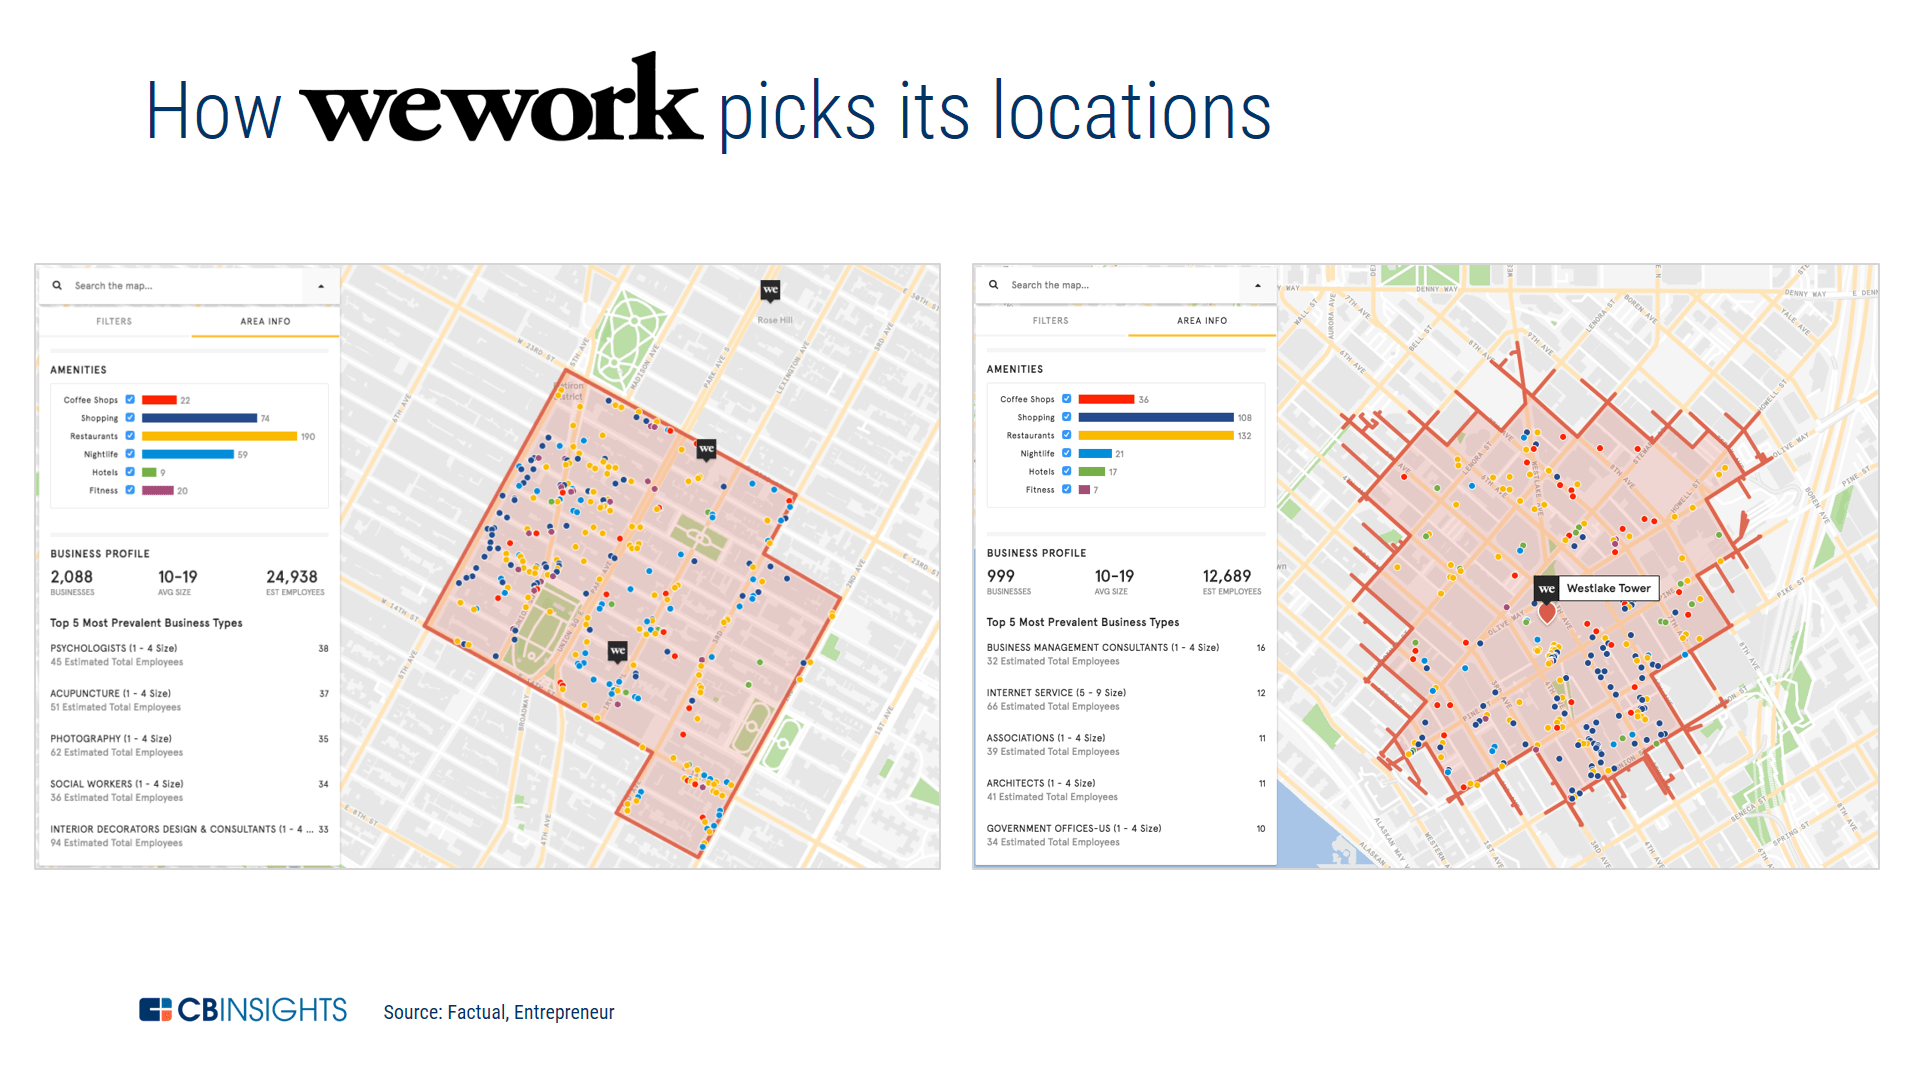 How WeWork picks its locations